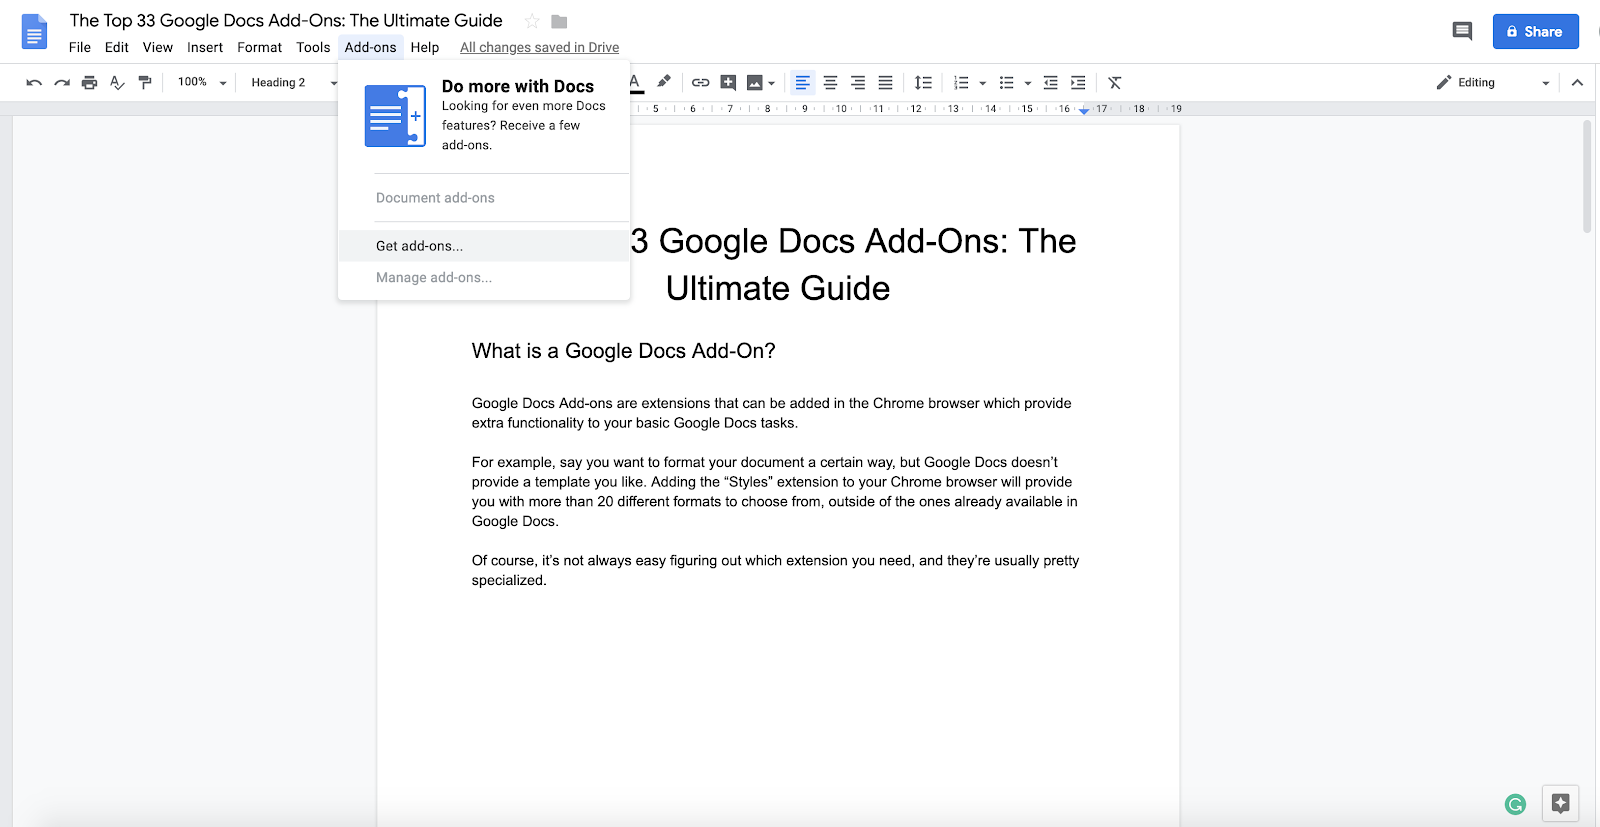 how to download fonts to google docs